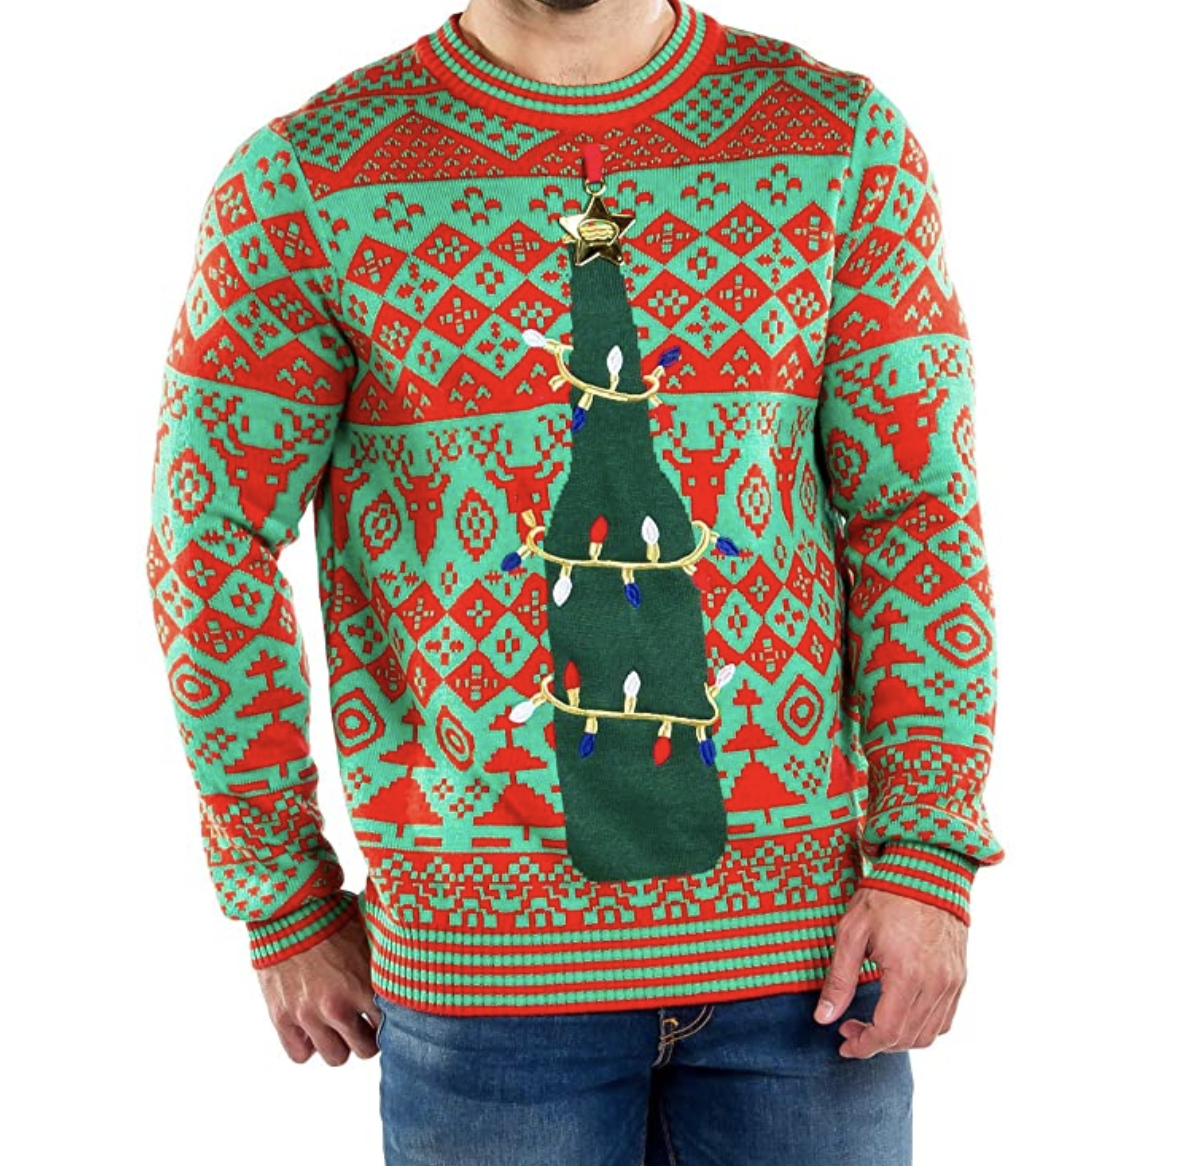 RAISEVERN Ugly Christmas Sweater Men Xmas Holiday Party Women Knitted Pullover Top 